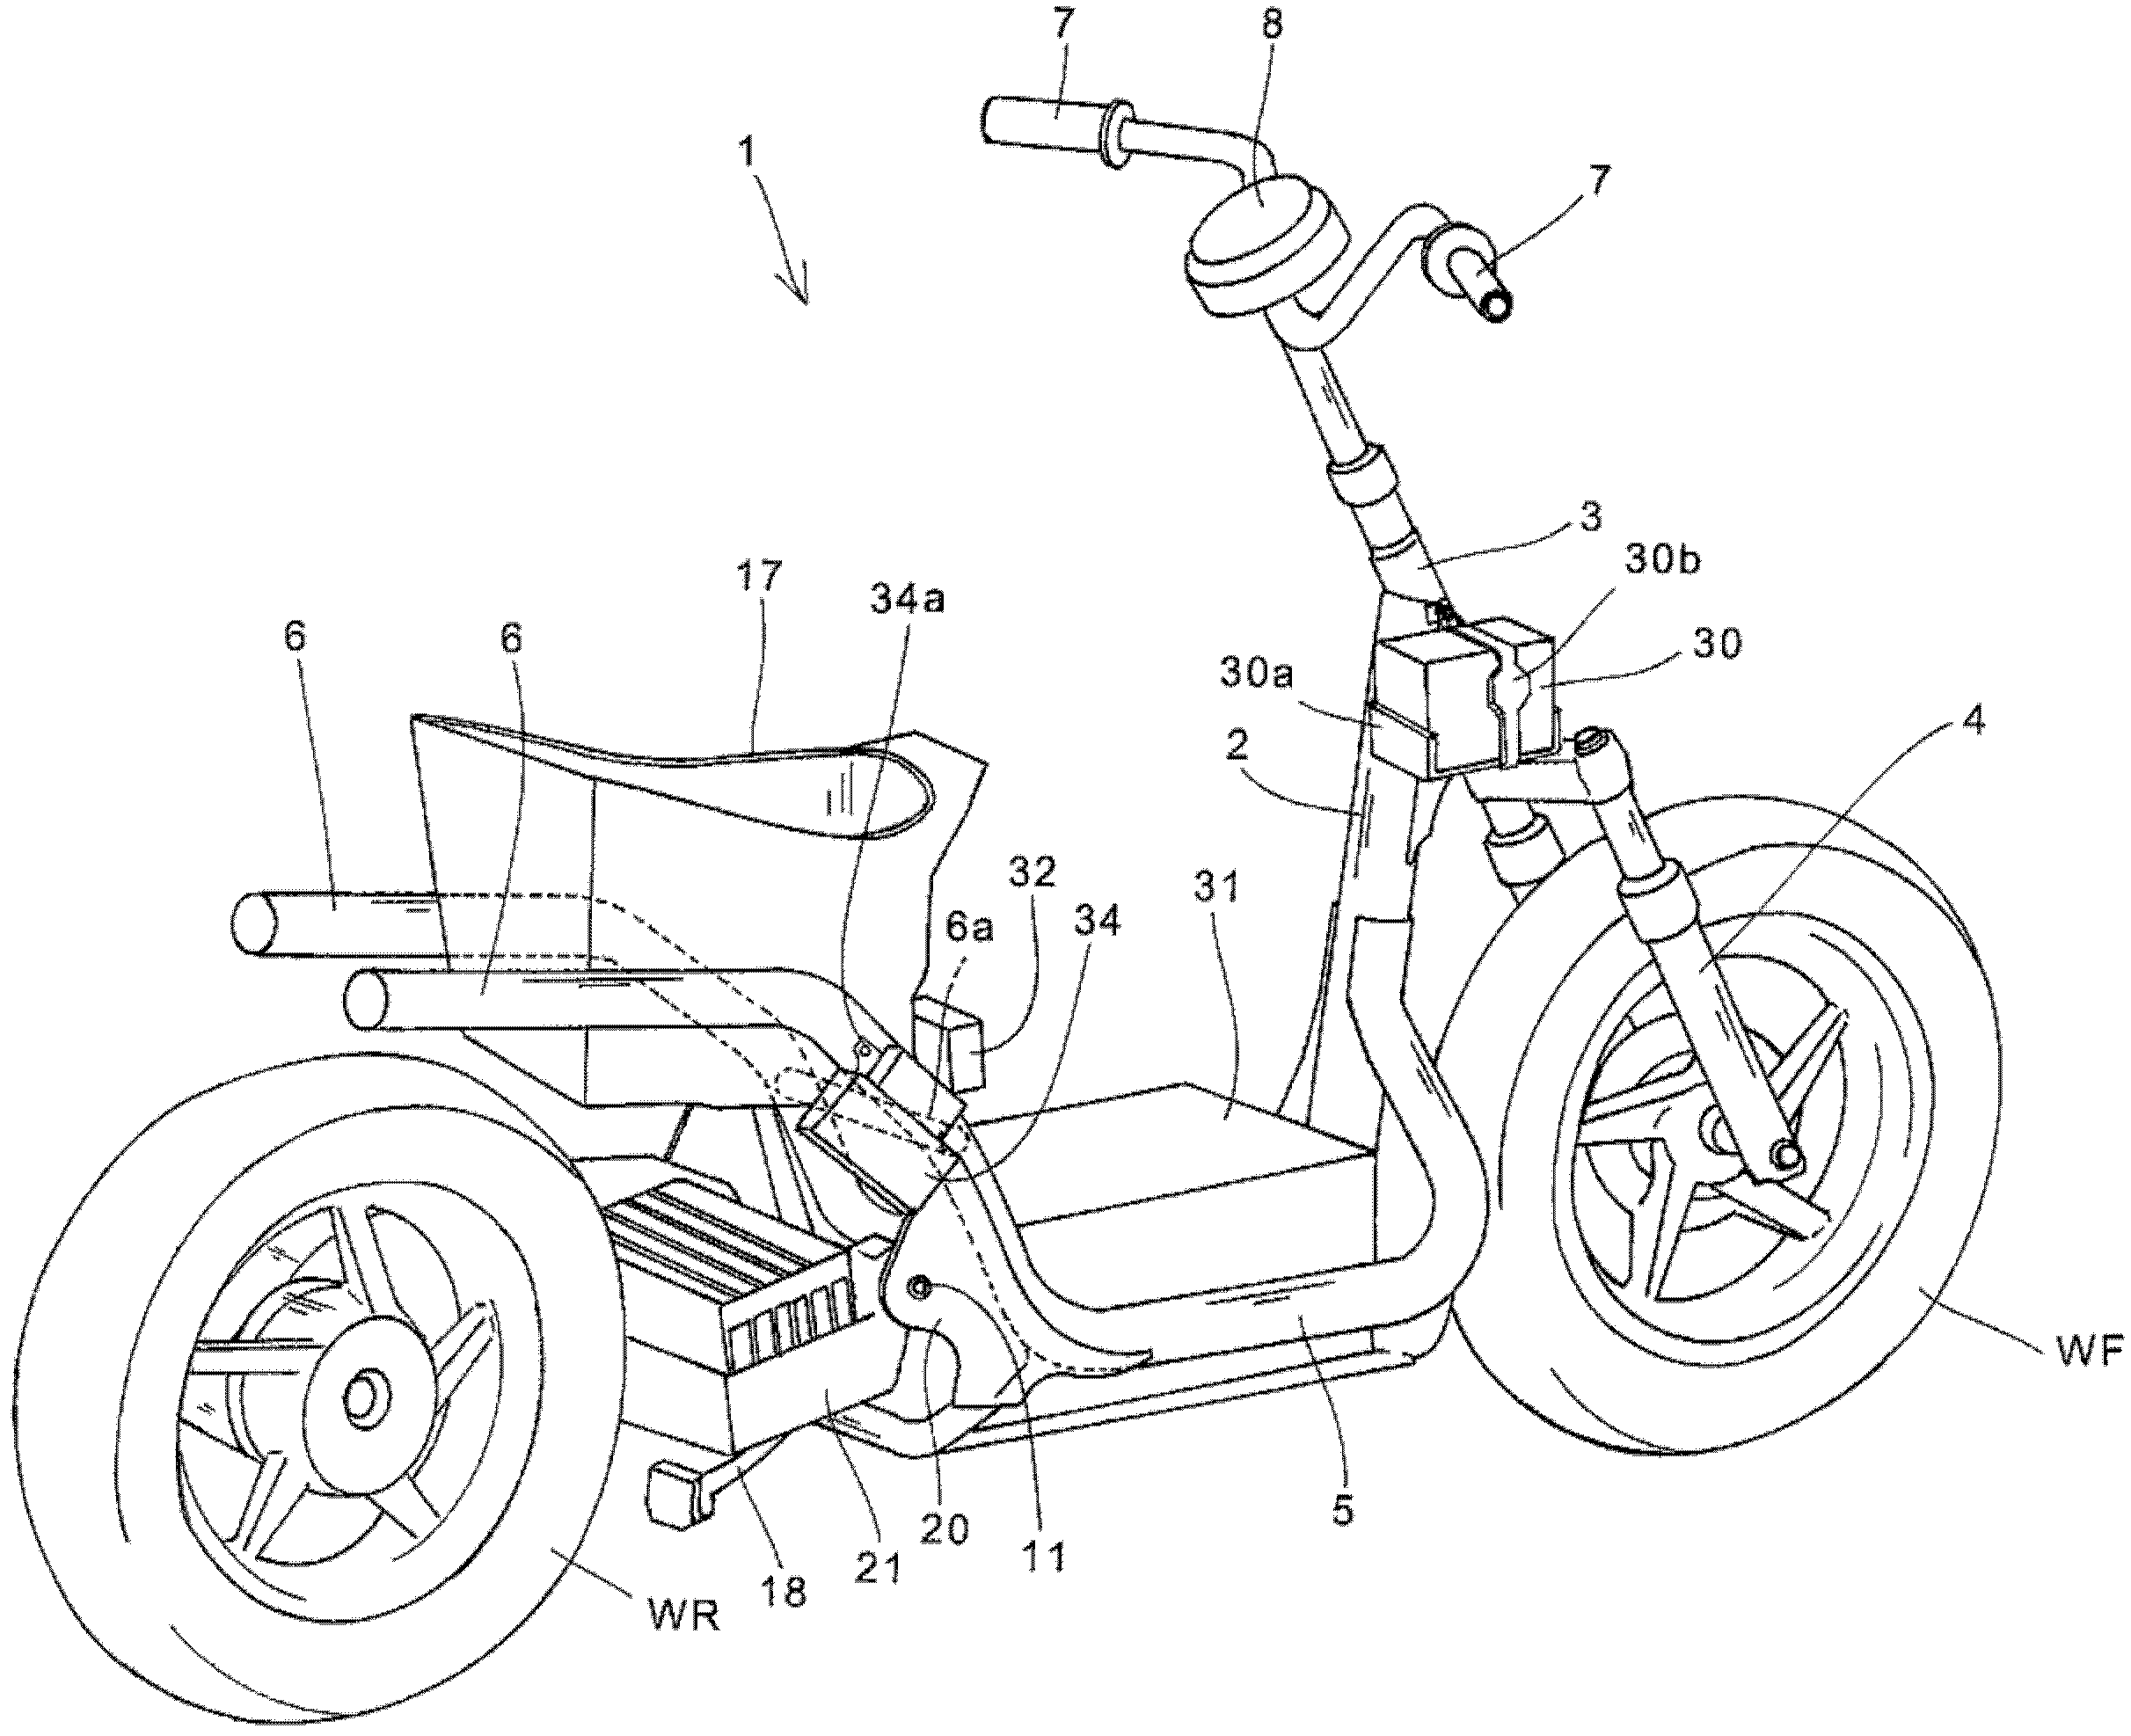 Electrically driven vehicle